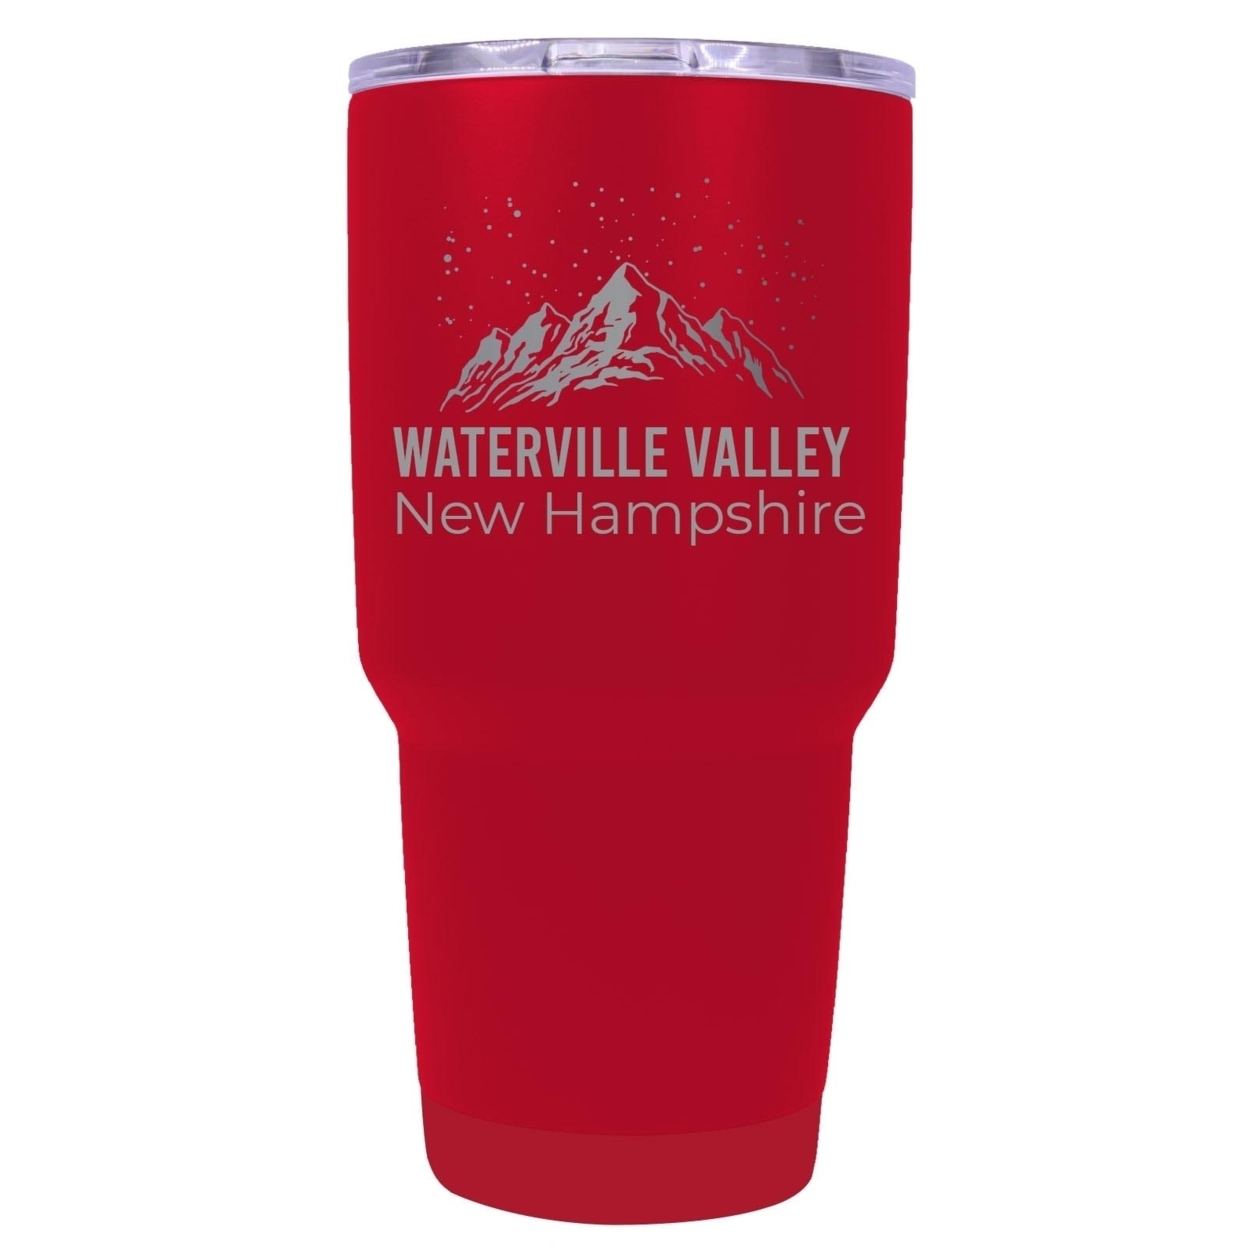 Waterville Valley New Hampshire Ski Snowboard Winter Souvenir Laser Engraved 24 Oz Insulated Stainless Steel Tumbler - Red